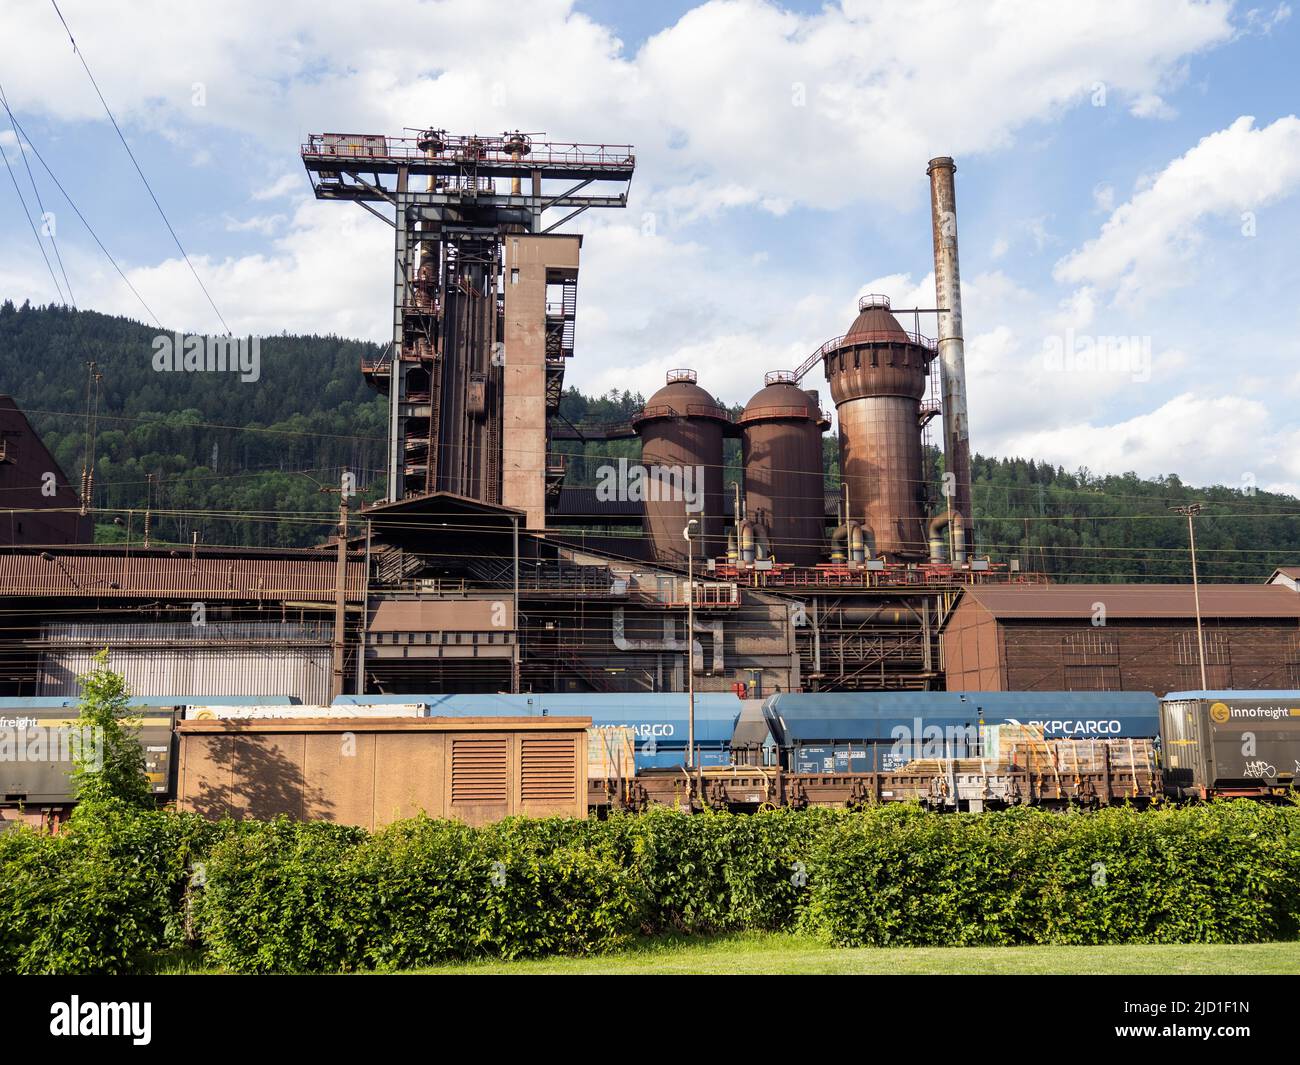 Railway in front of blast furnace, voestalpine steelworks in the Donawitz district, known for the first application of the Linz-Donawitz process for Stock Photo